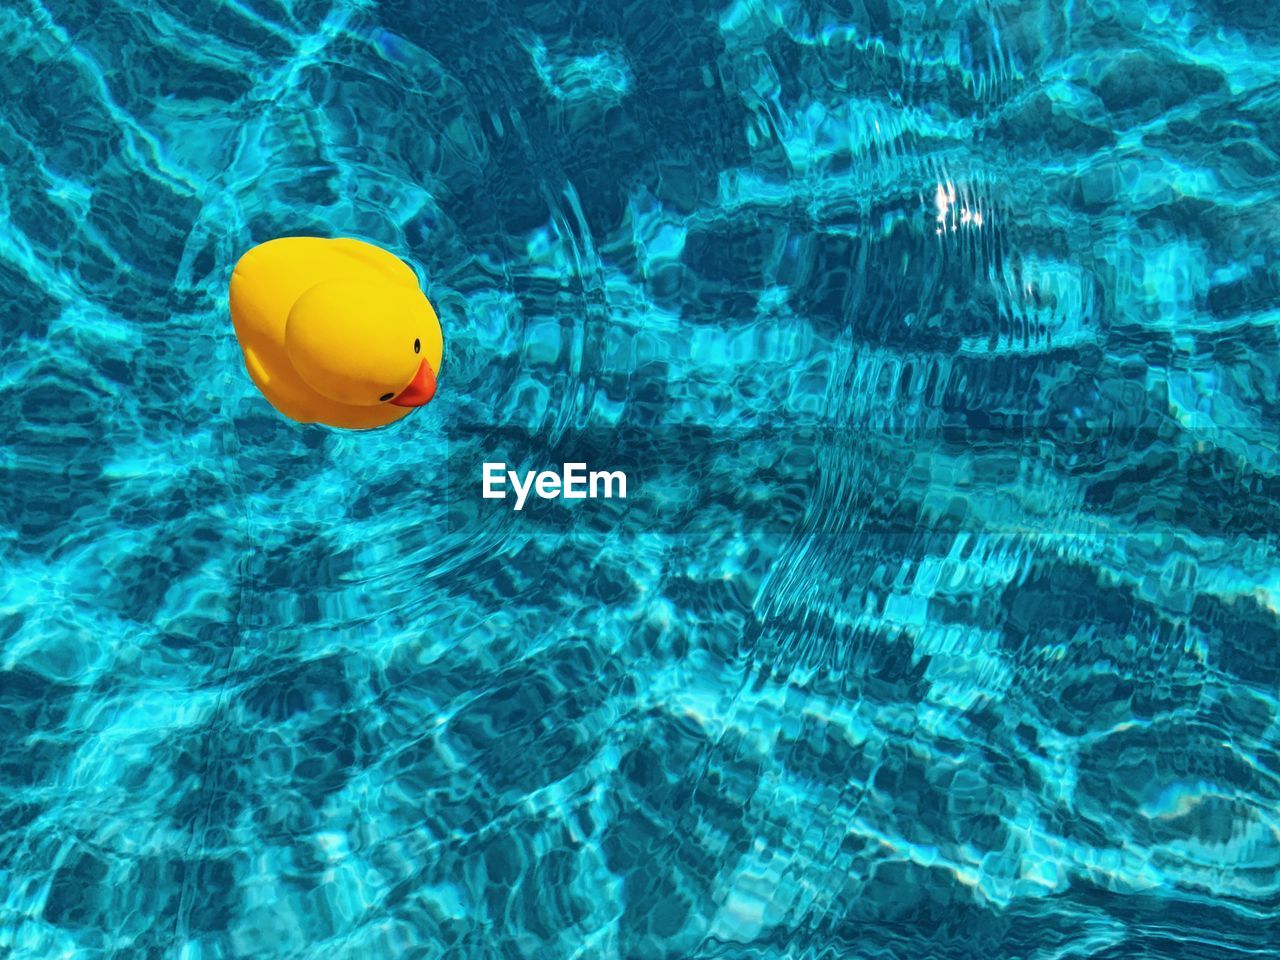 Yellow rubber ducky in blue swimming pool